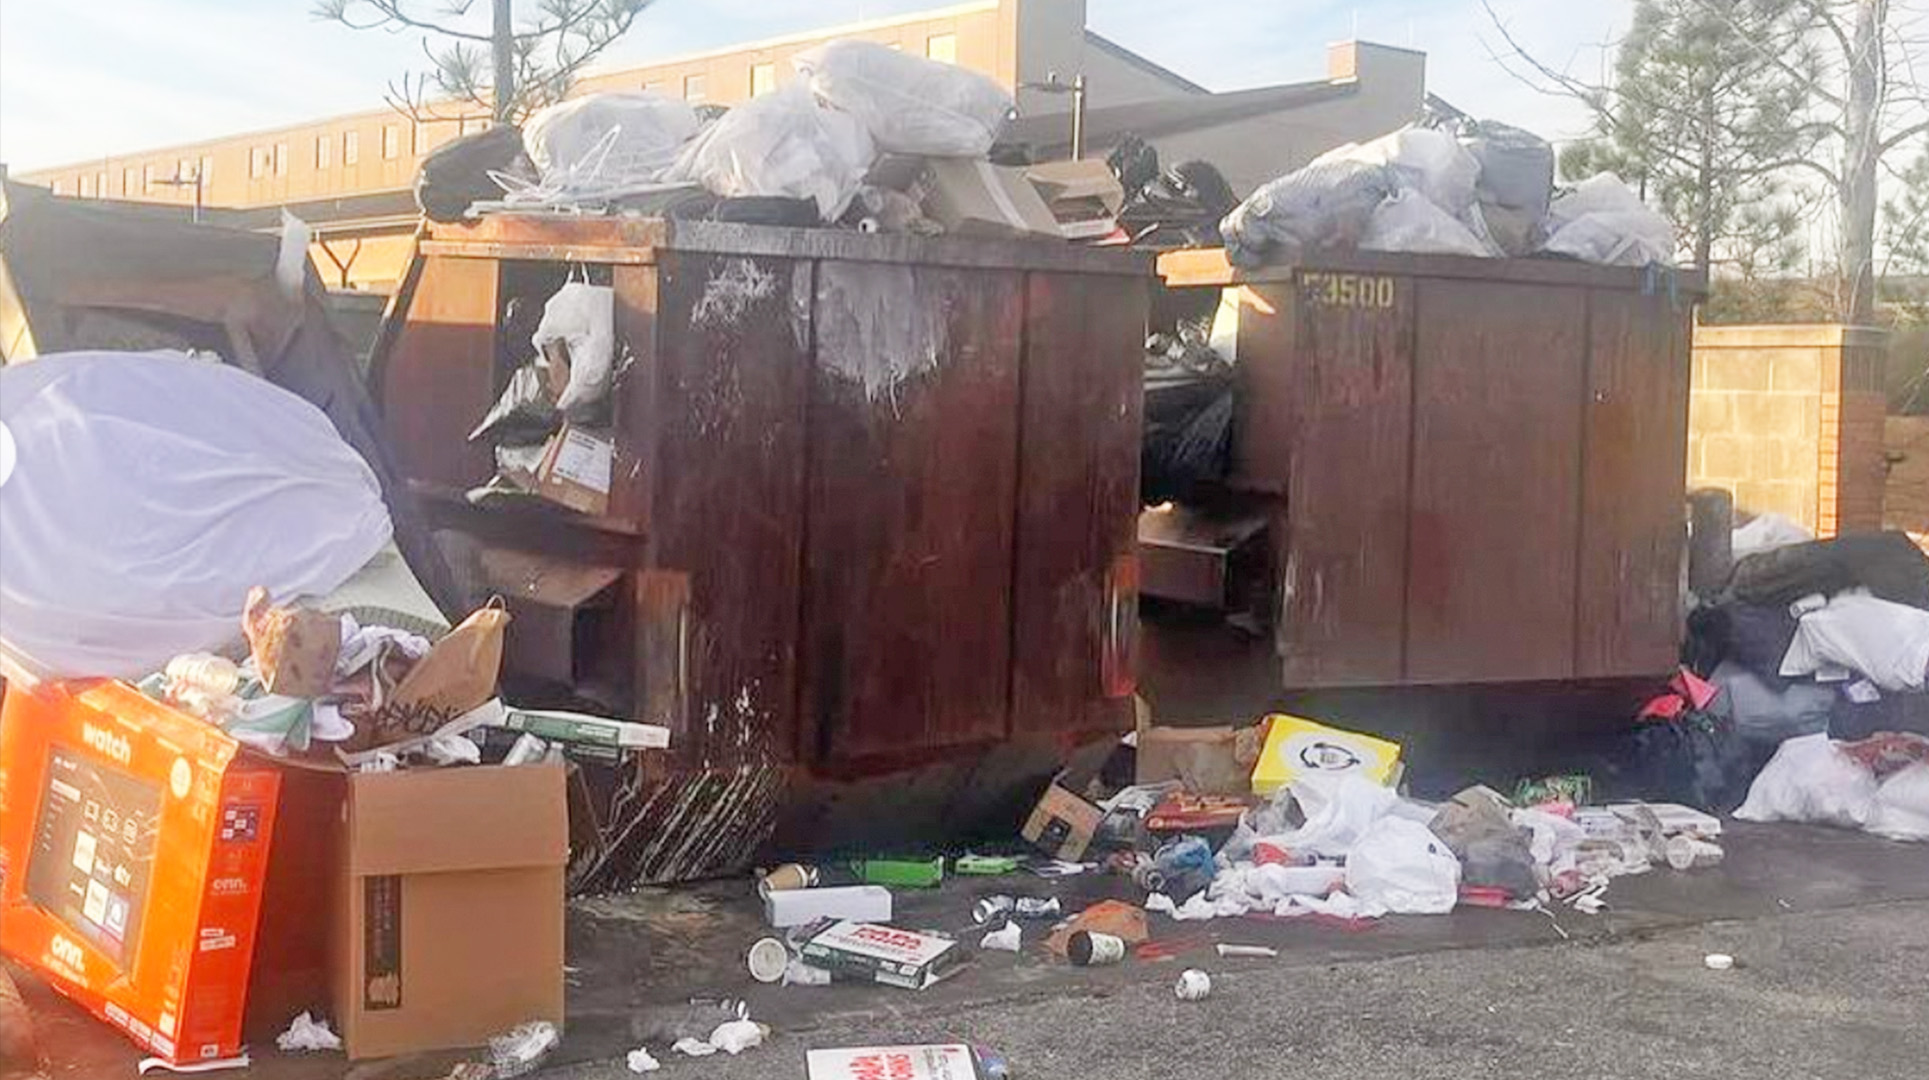 Soldiers stationed at Fort Liberty say a slow down in trash collection has led to overflowing dumpsters across the base. Photo from "@Fancy_fancy_bear" on Instagram.